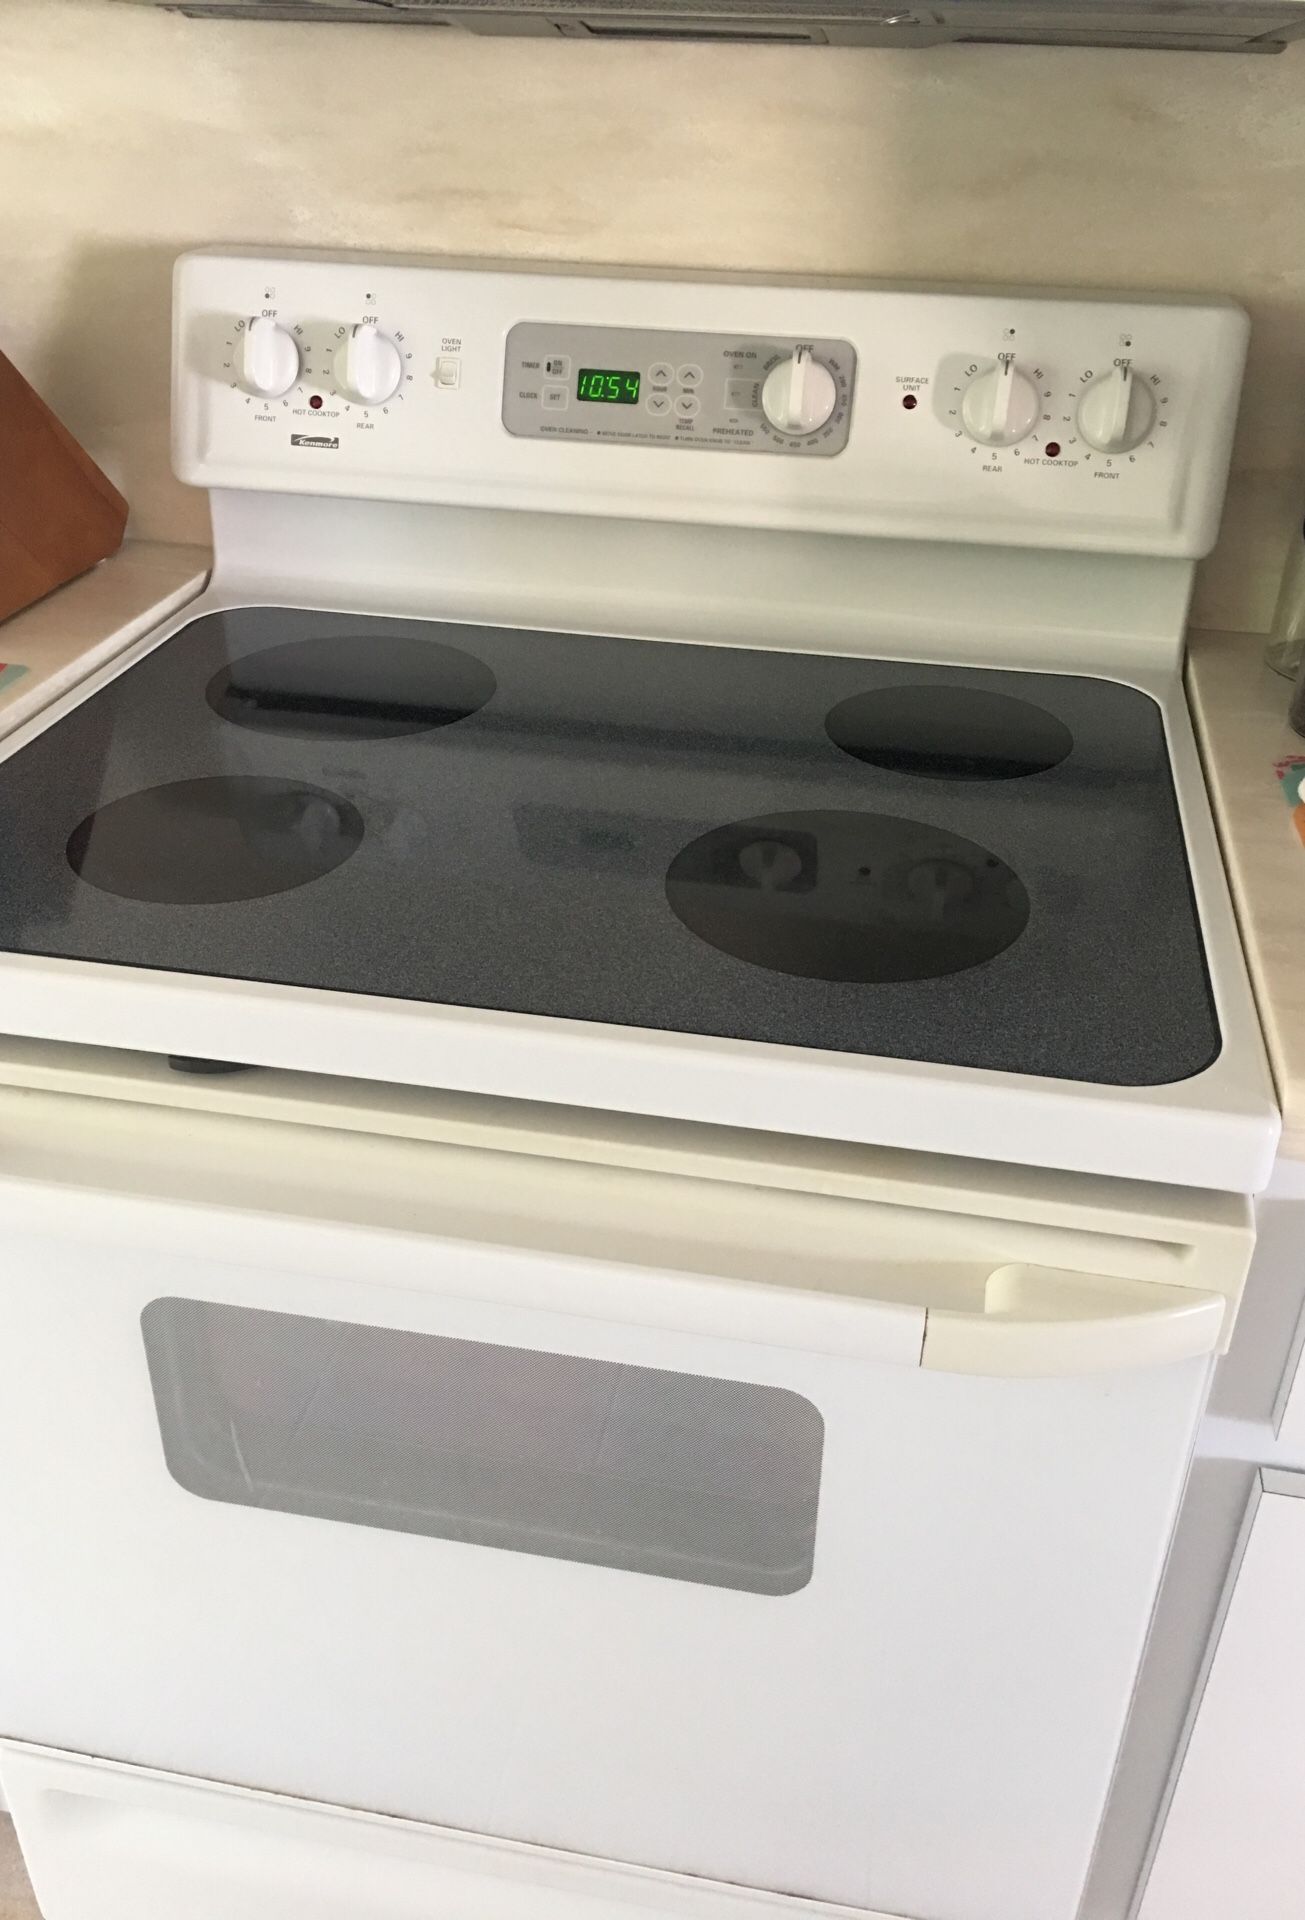 Kenmore stove works good we can deliver close by $30 for change deliver fee